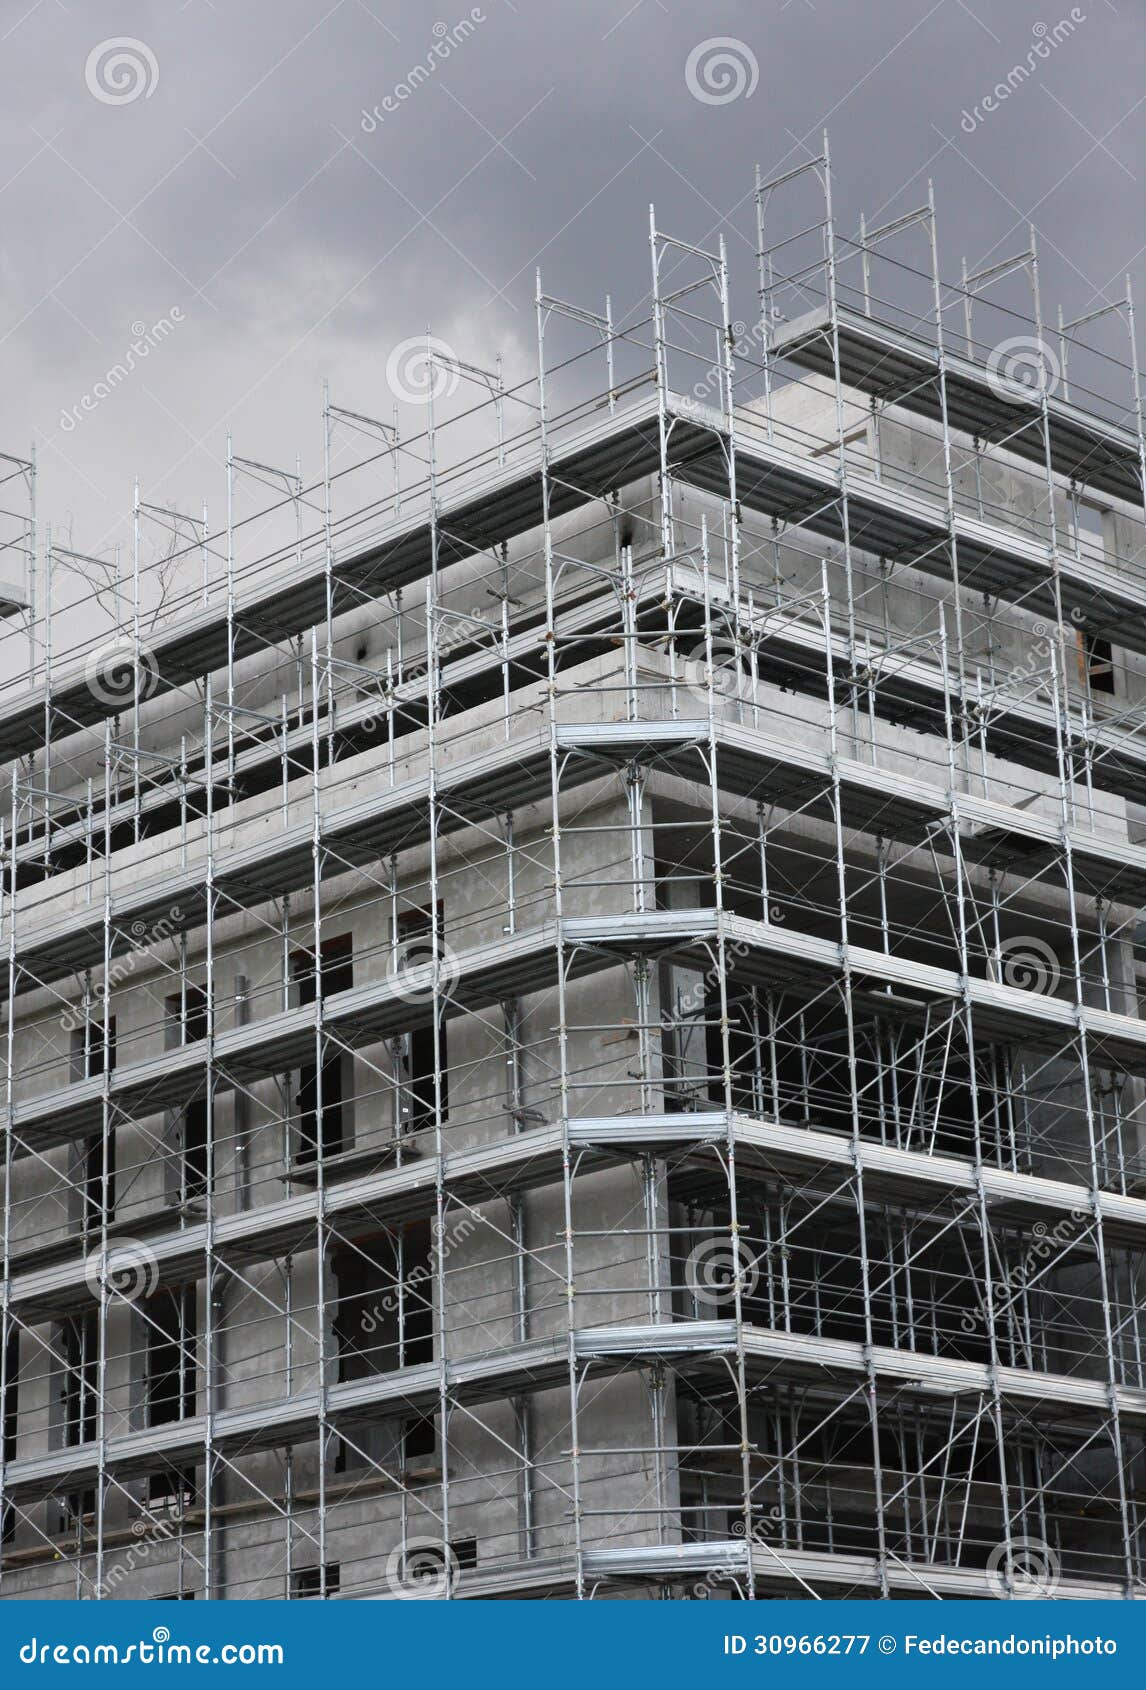 structure of a skyscraper under construction with the lead